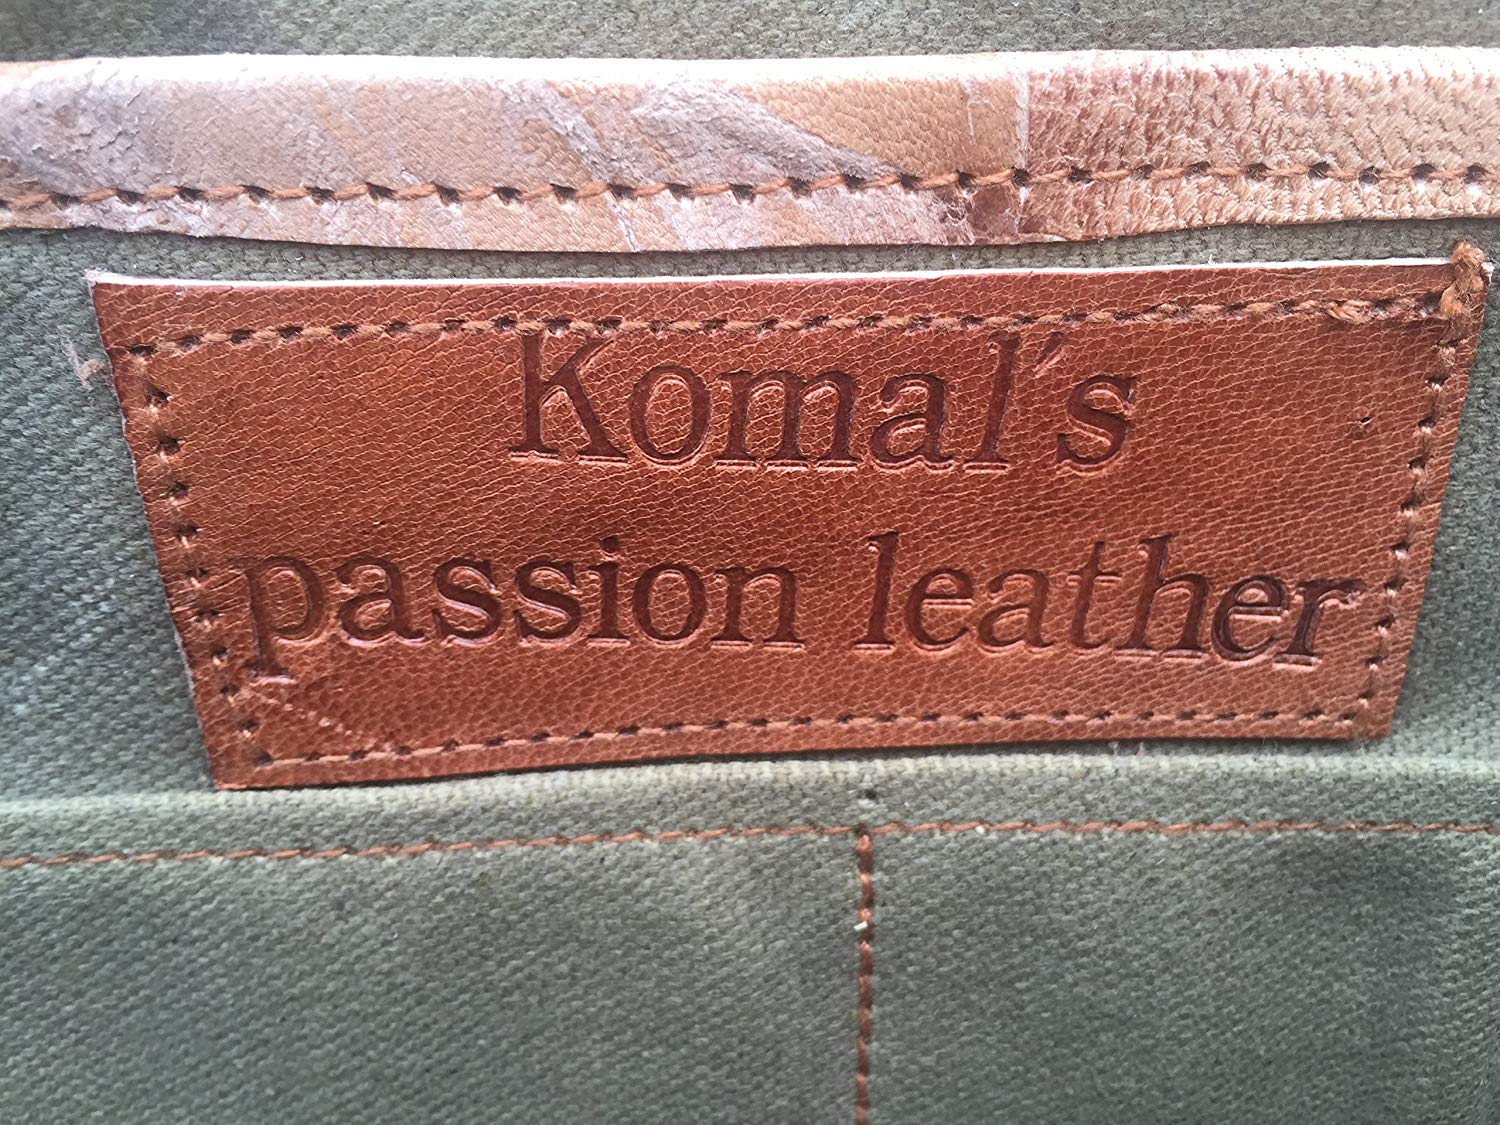 Komal's Passion Leather Komalc 18 inch Leather Briefcases /Laptop Messenger Bags for Men and Women Best Office School College Satchel Bag (Tan with